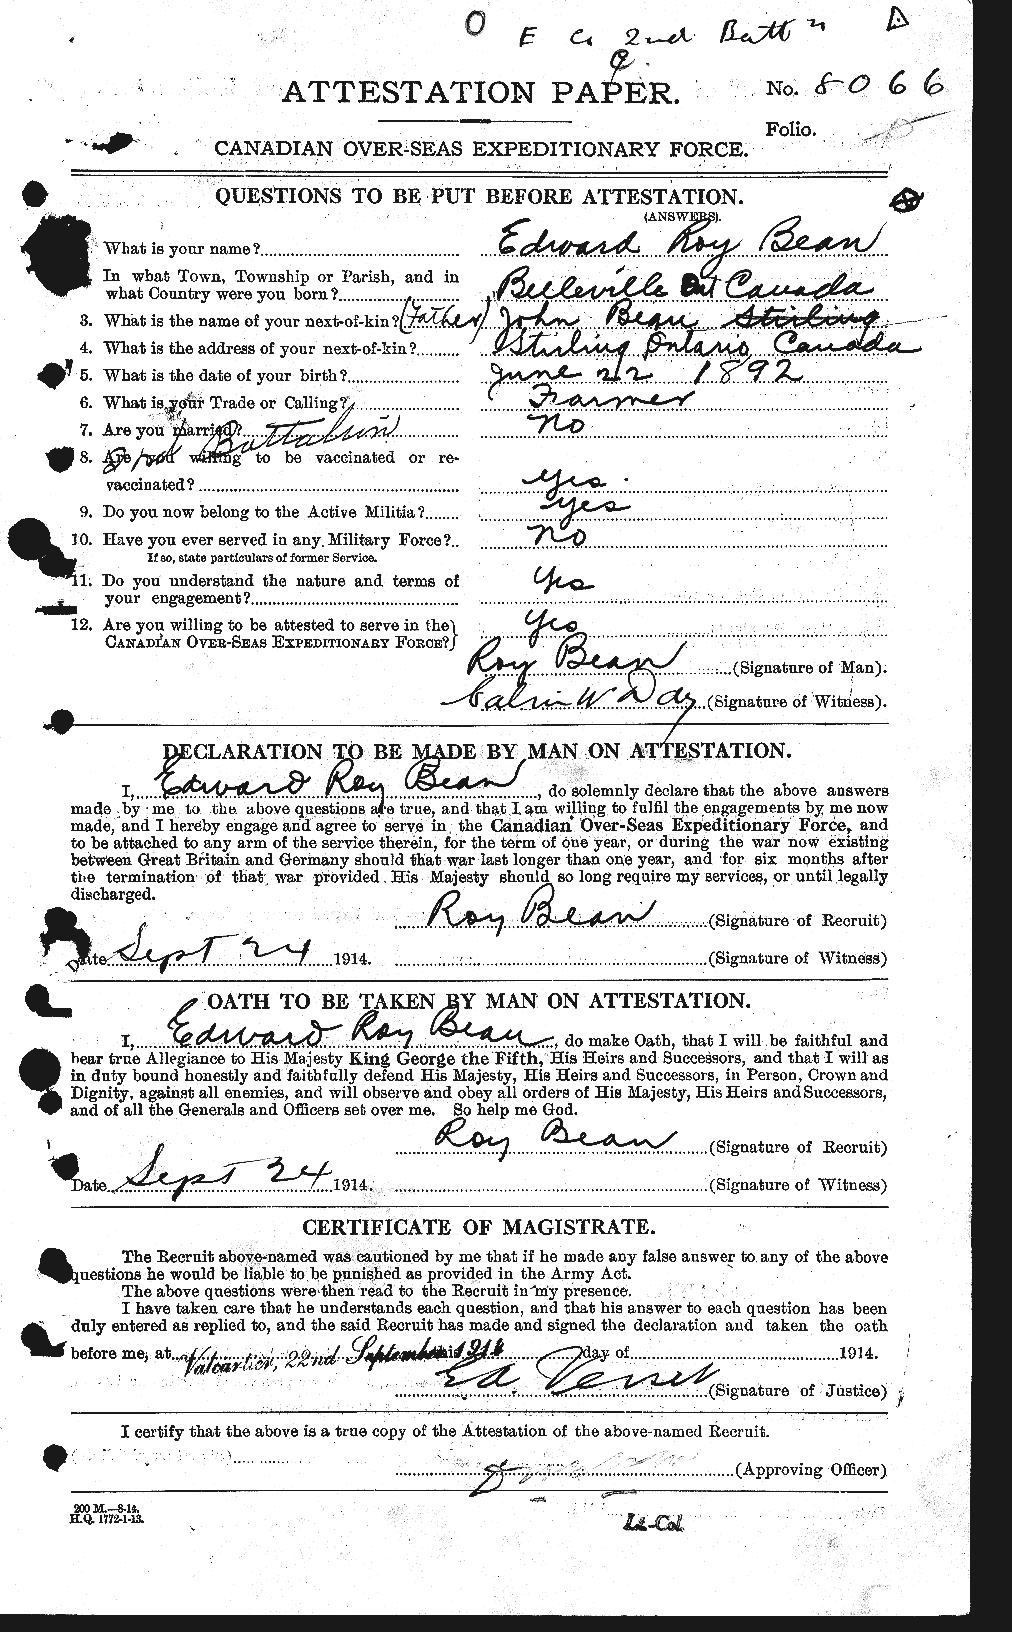 Personnel Records of the First World War - CEF 230169a